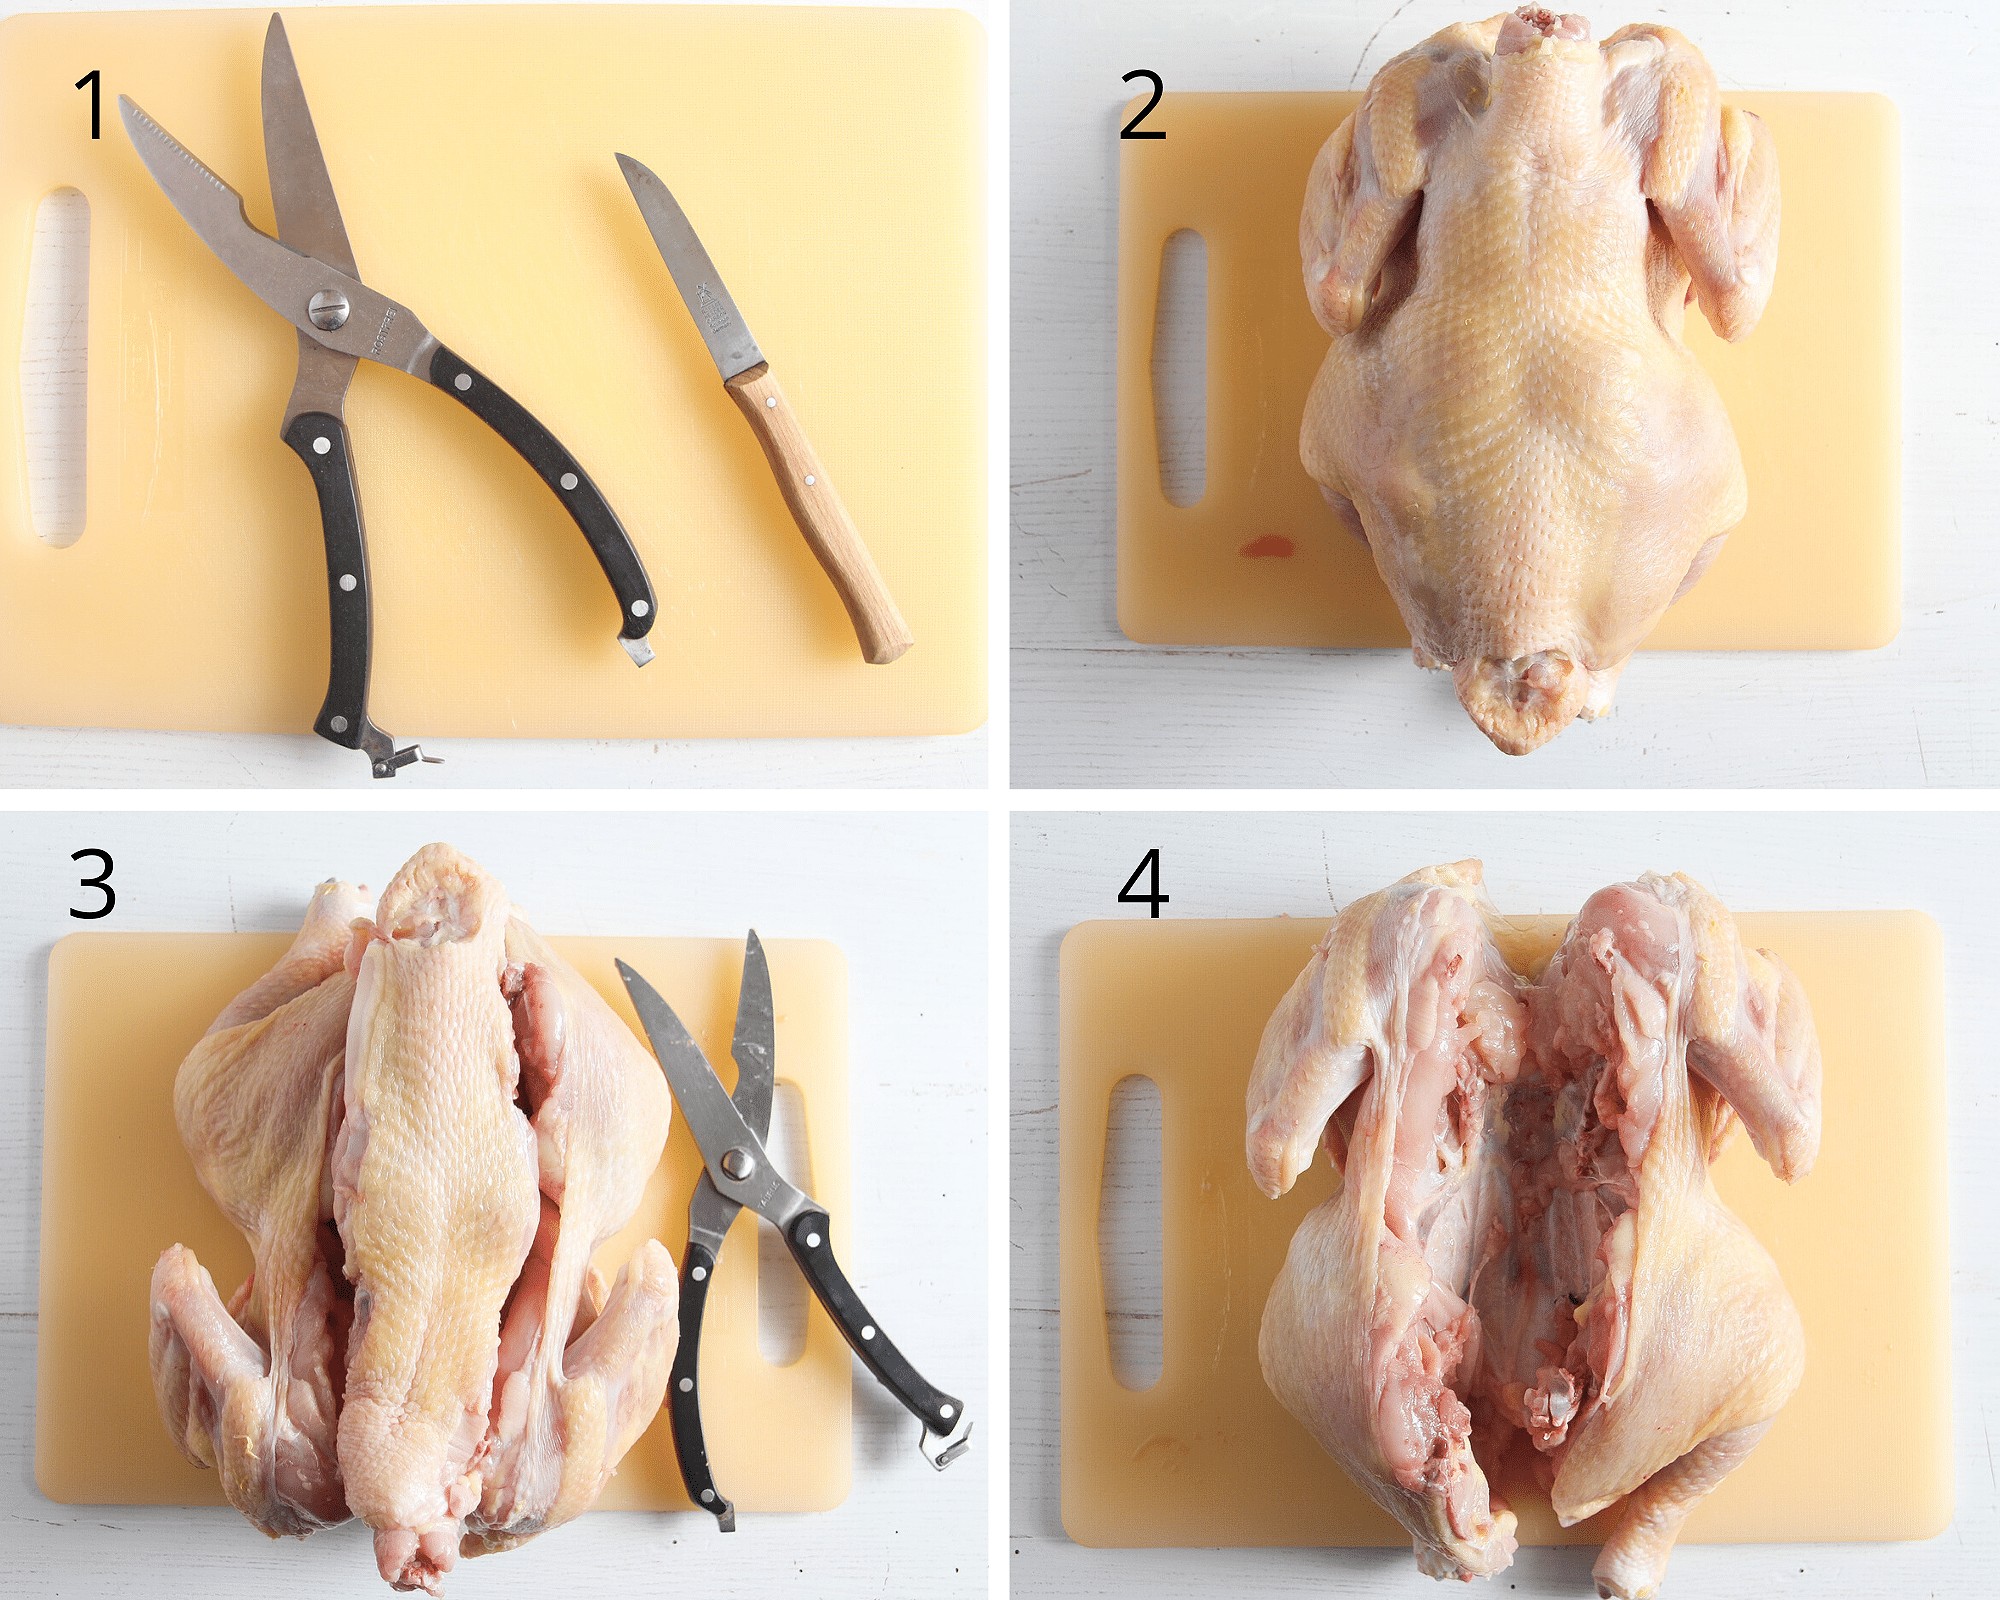 How Long To Cook Halved Chicken Breast In Oven?